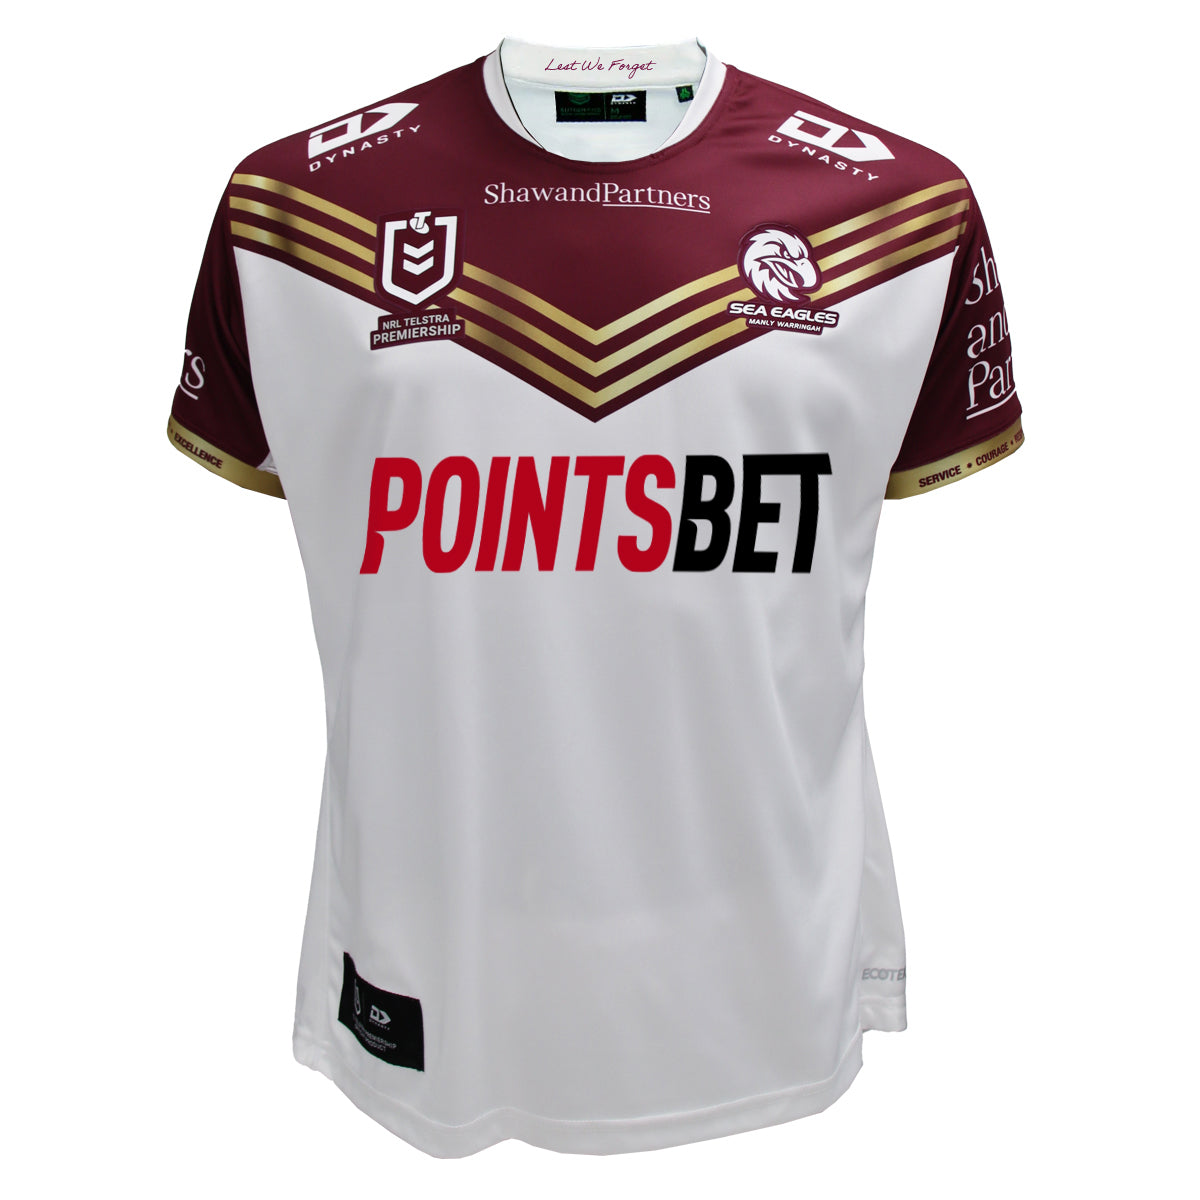 Manly Sea Eagles Anzac Jersey